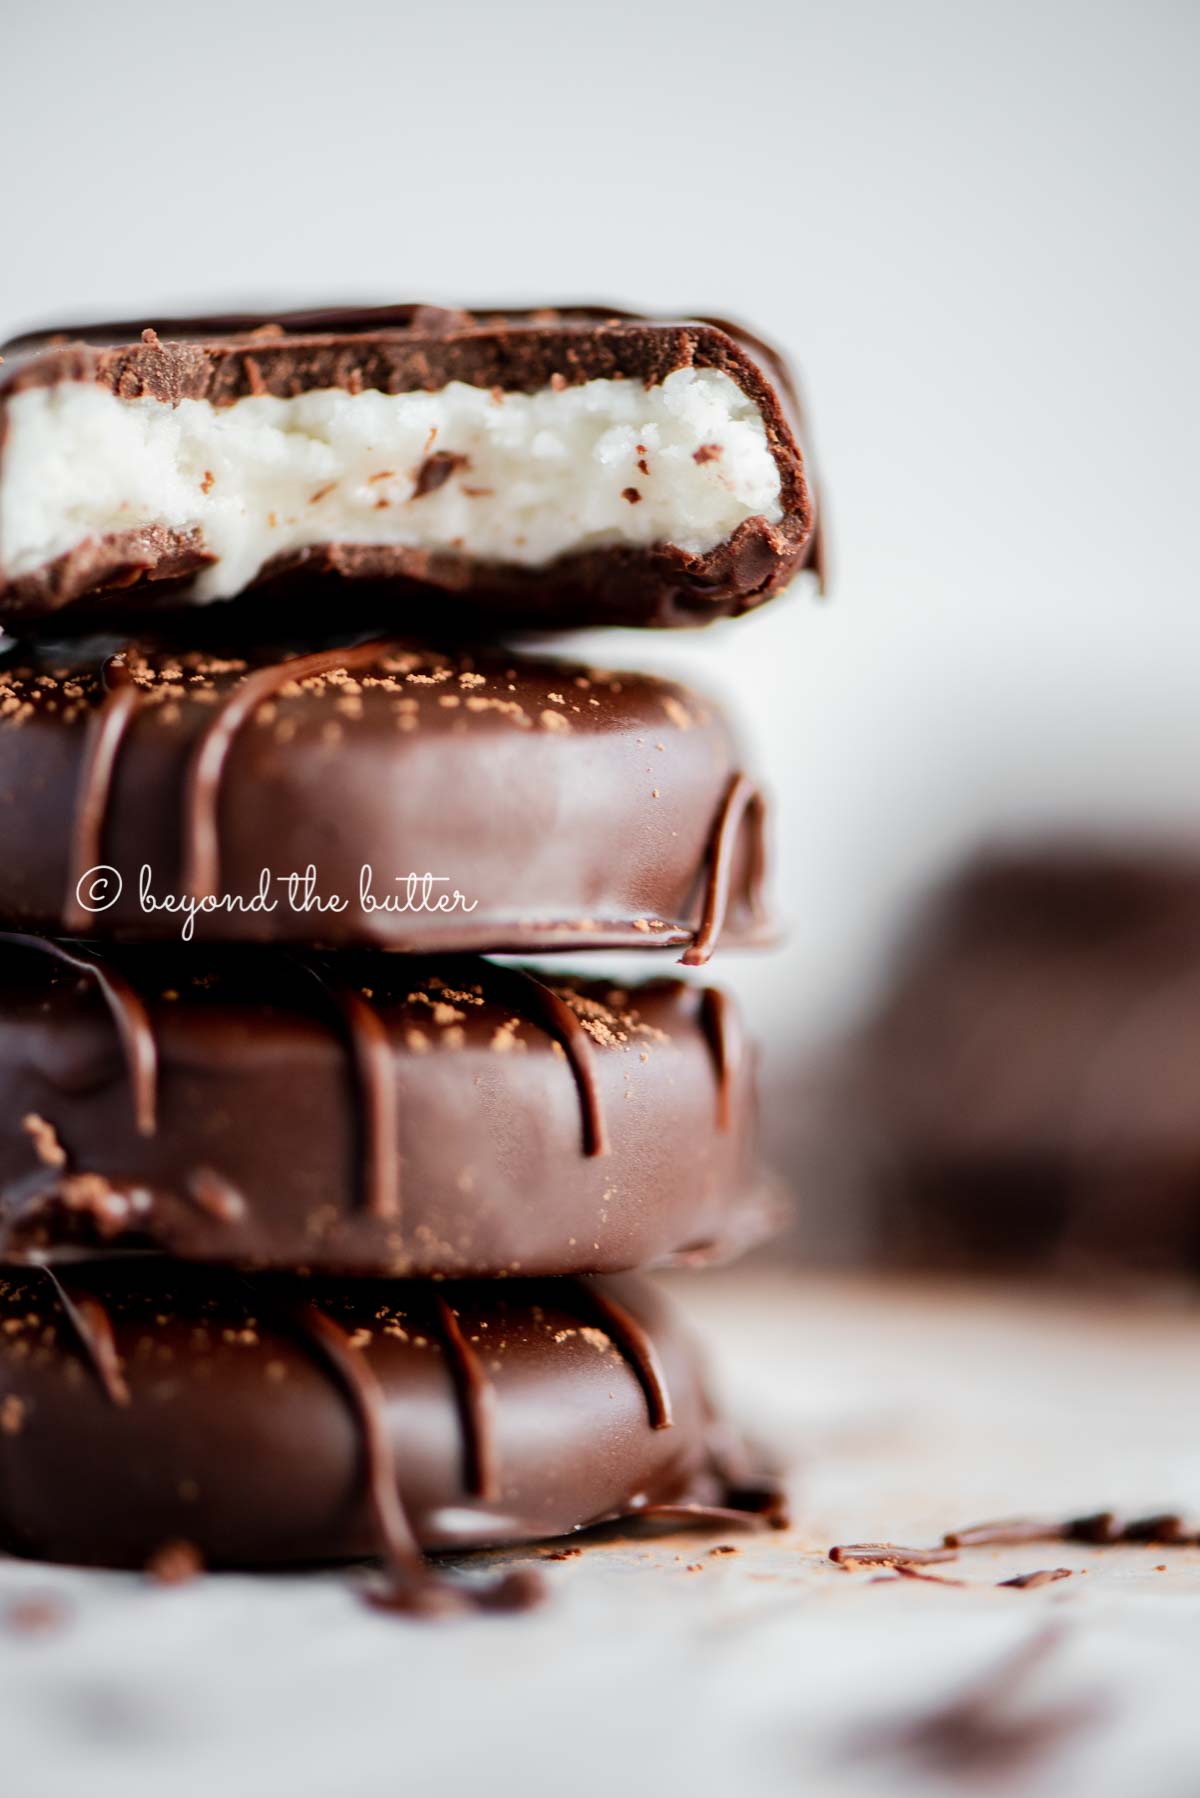 Stacked homemade peppermint patties with a bite taken out of the top patty | All Images © Beyond the Butter®